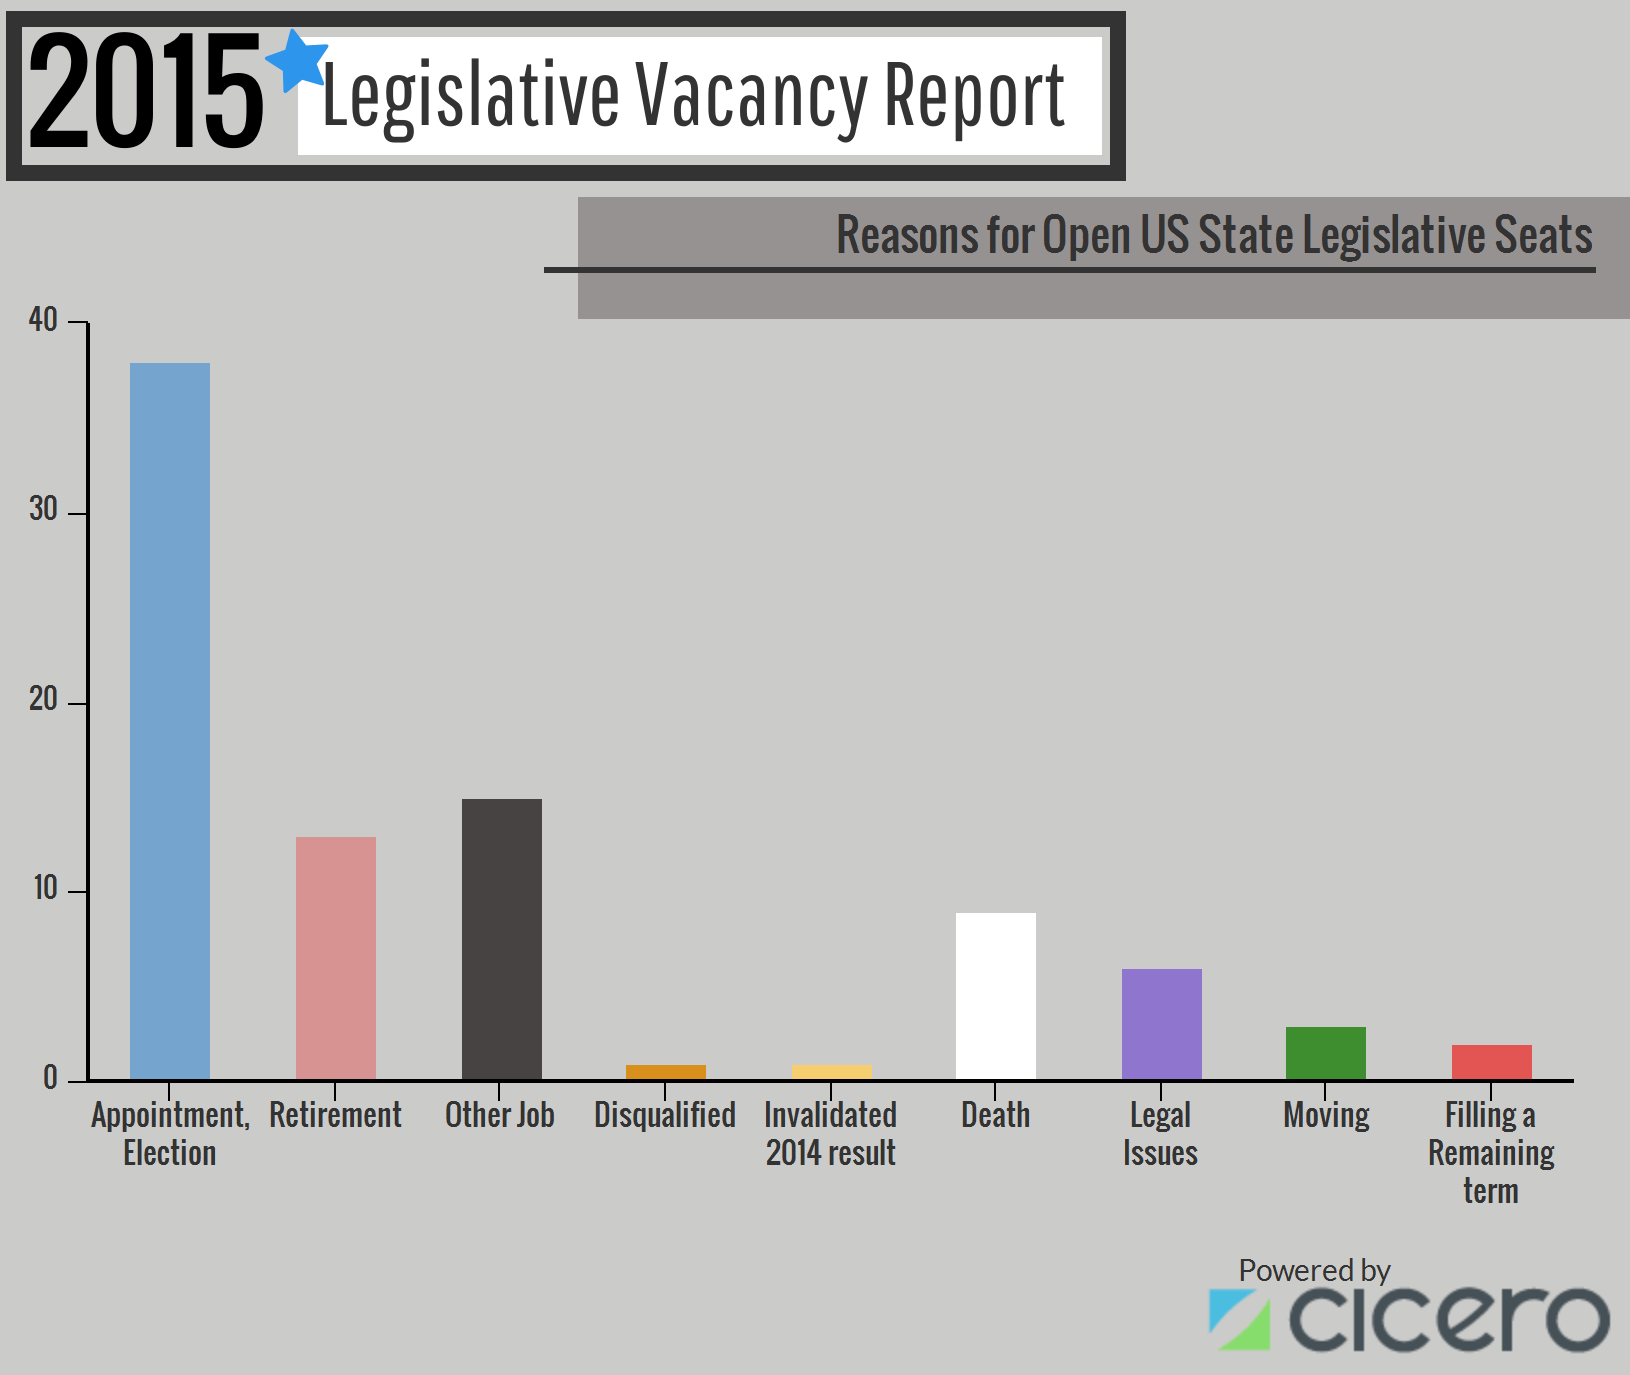 A graph showing Reasons for open US State Legislative Seats in 2015